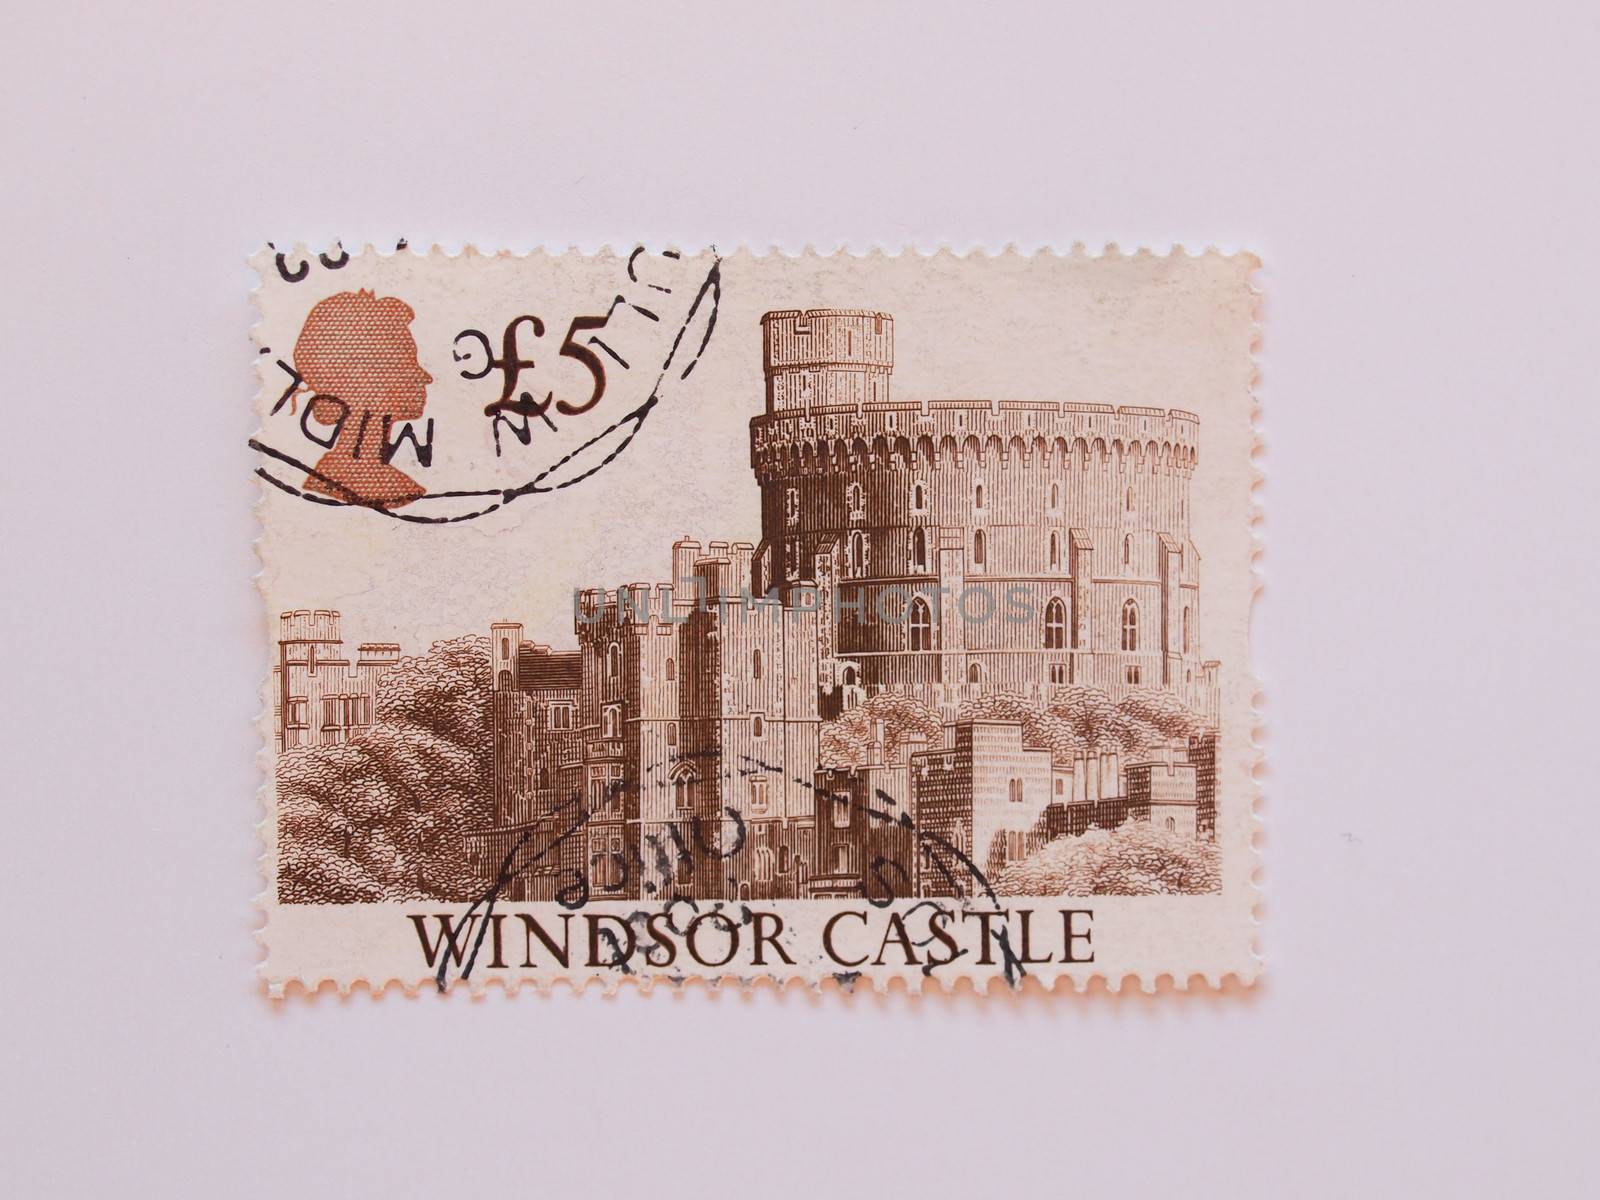 UK stamp with Windsor castle by paolo77